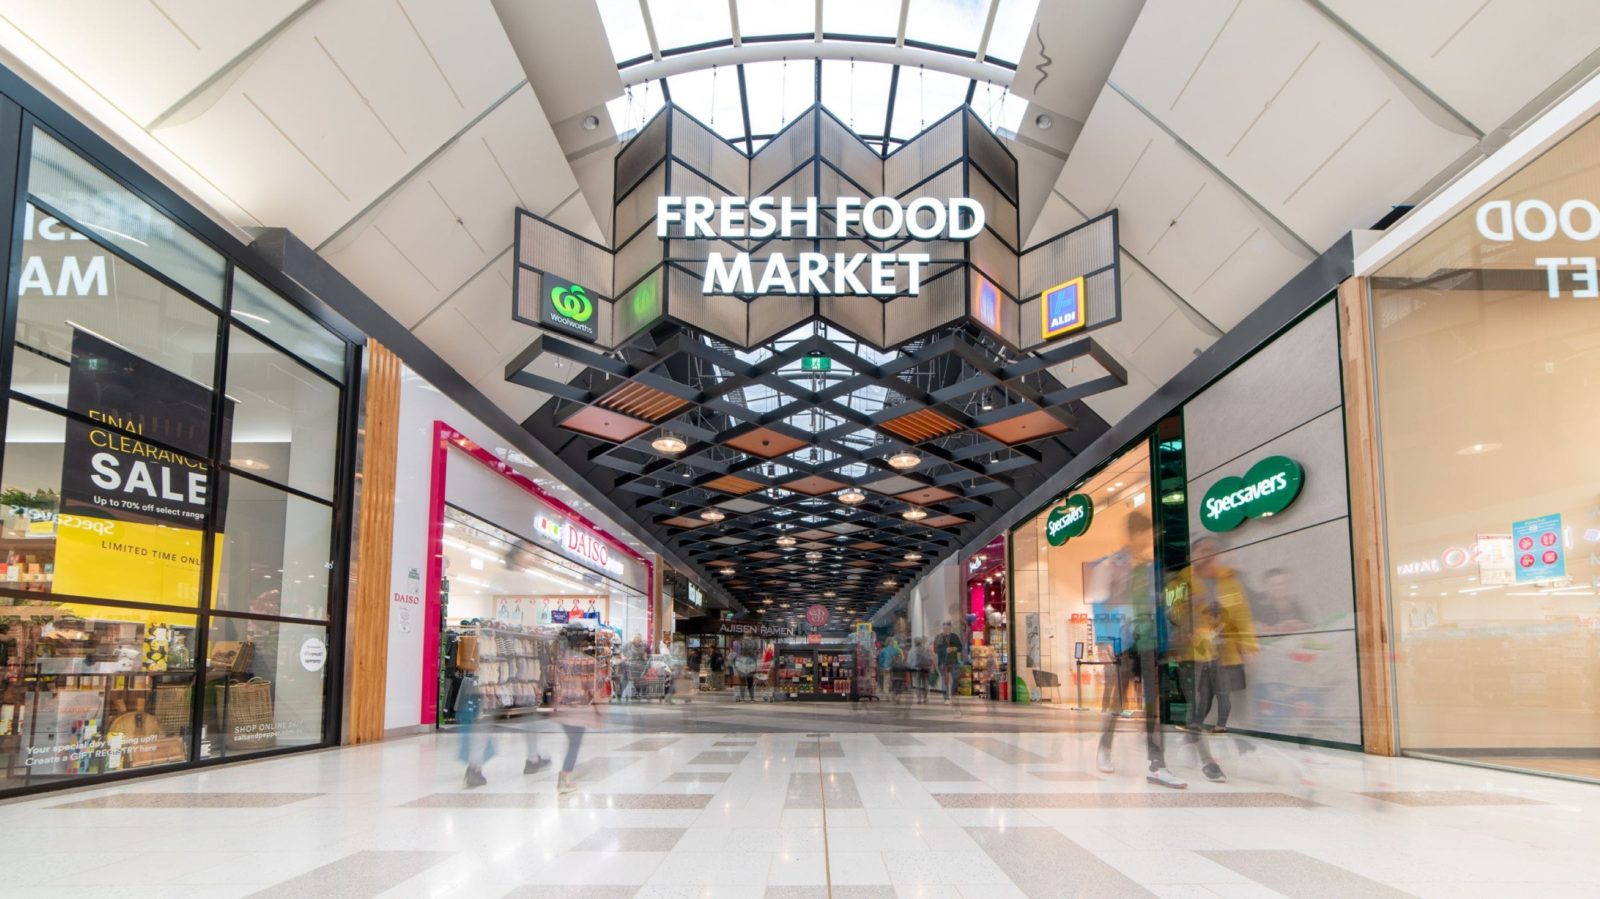 fresh food market section of the shopping centre